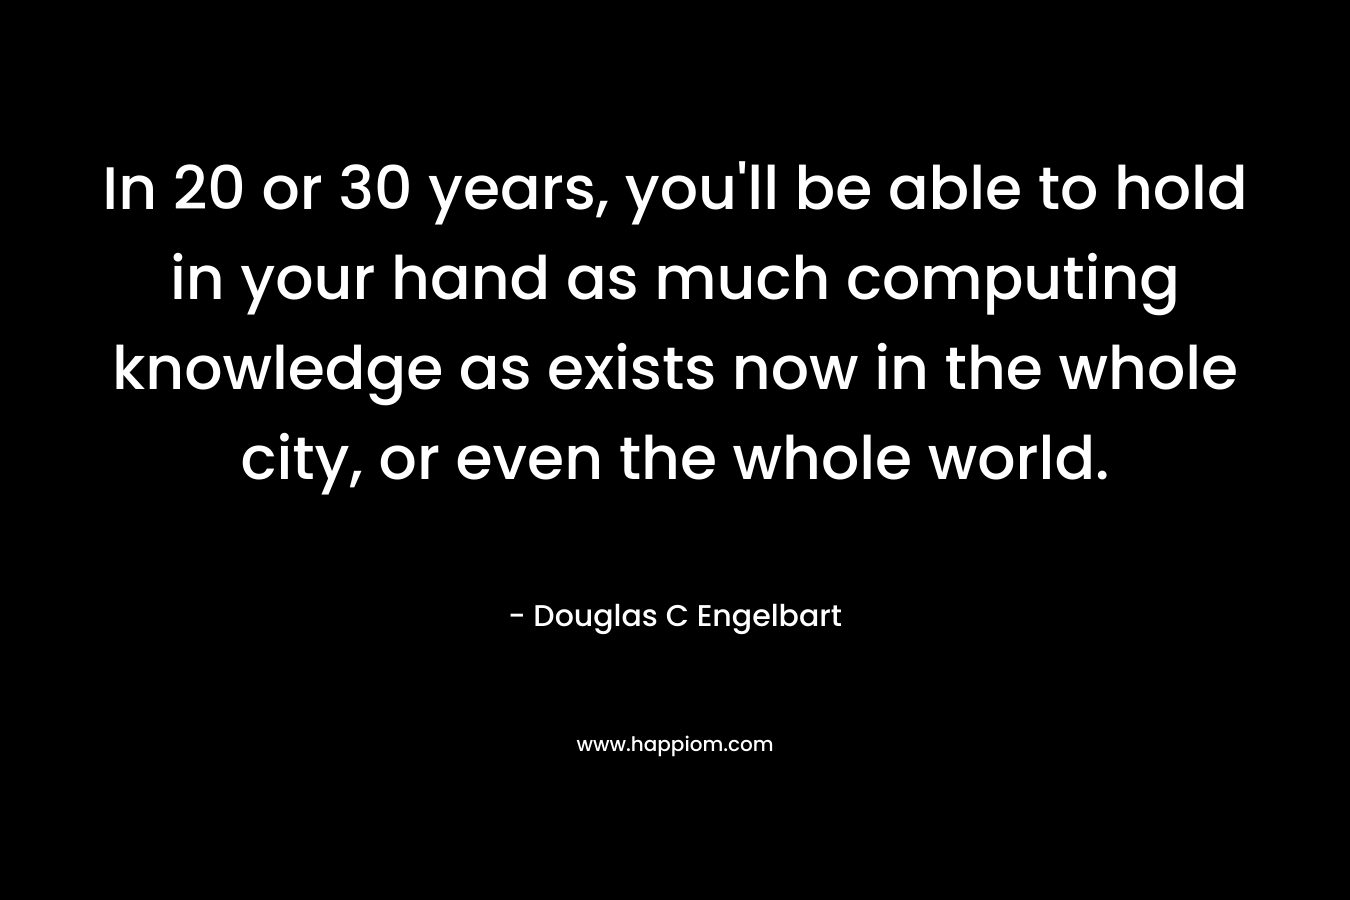 In 20 or 30 years, you'll be able to hold in your hand as much computing knowledge as exists now in the whole city, or even the whole world.